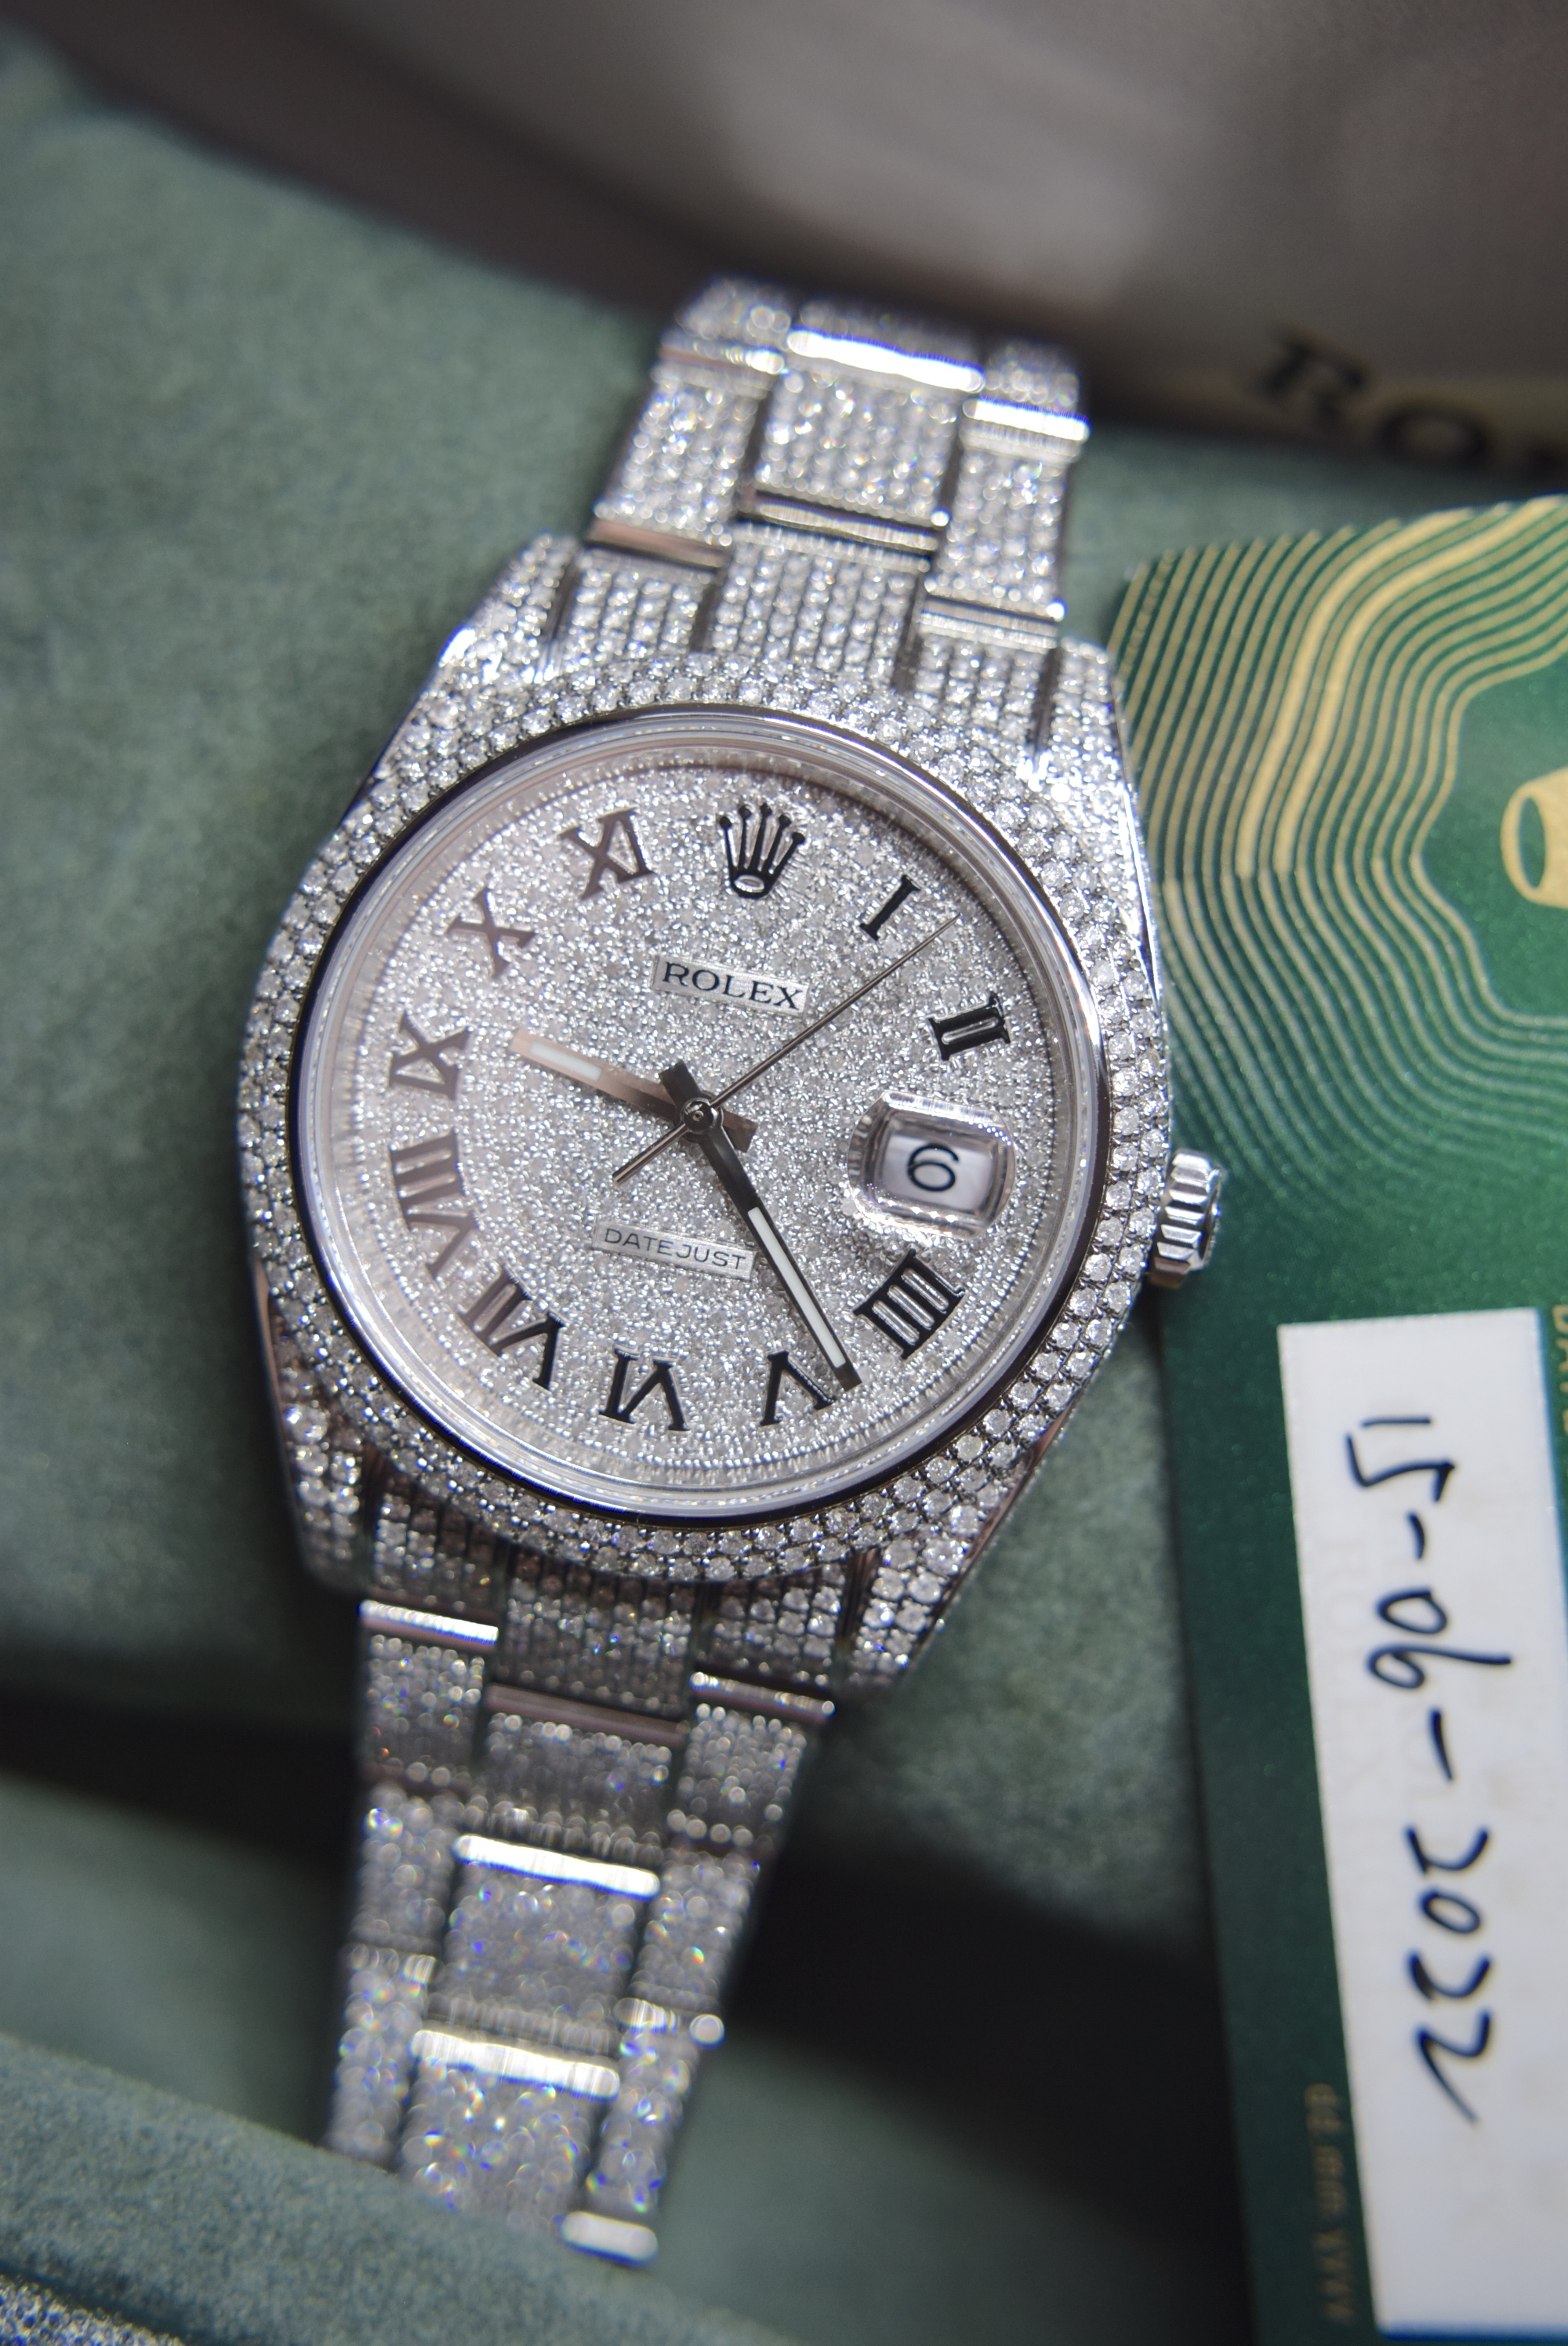 2022 ROLEX DATEJUST 41 REF. 126300 (FULLY DIAMOND-SET) WITH CERTIFICATE CARD - STAINLESS STEEL 41MM